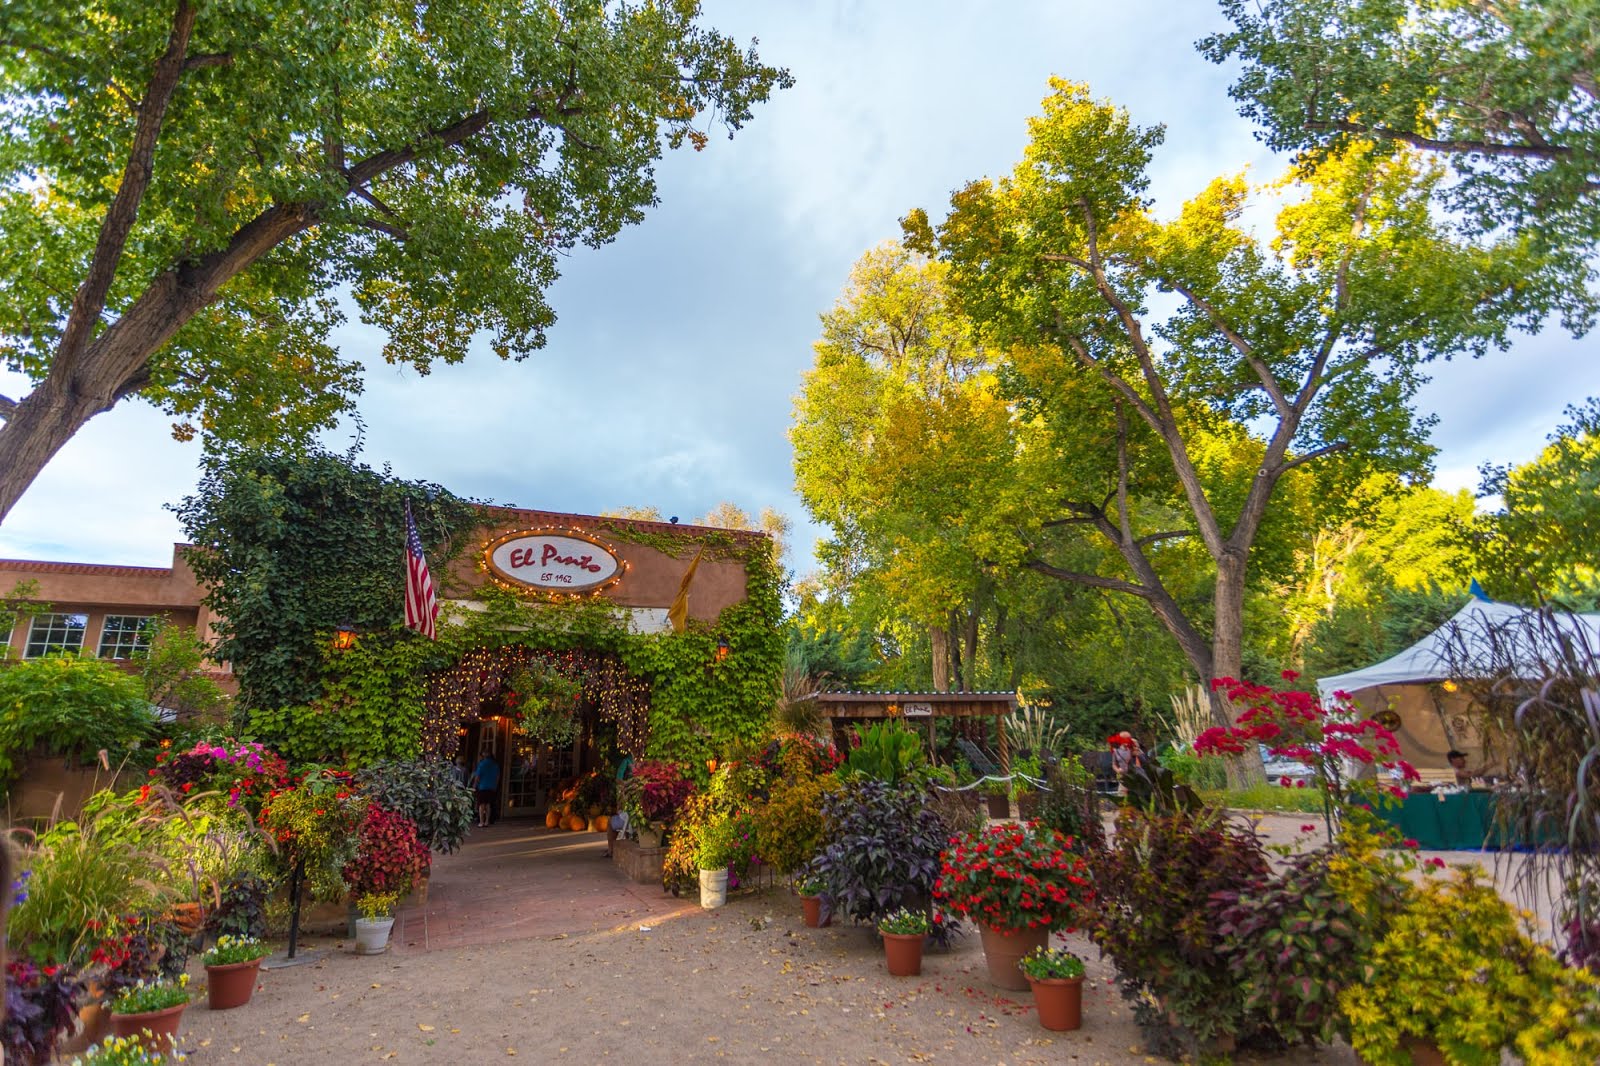 16 Of the Best Places to Eat in Albuquerque - Finding the Universe